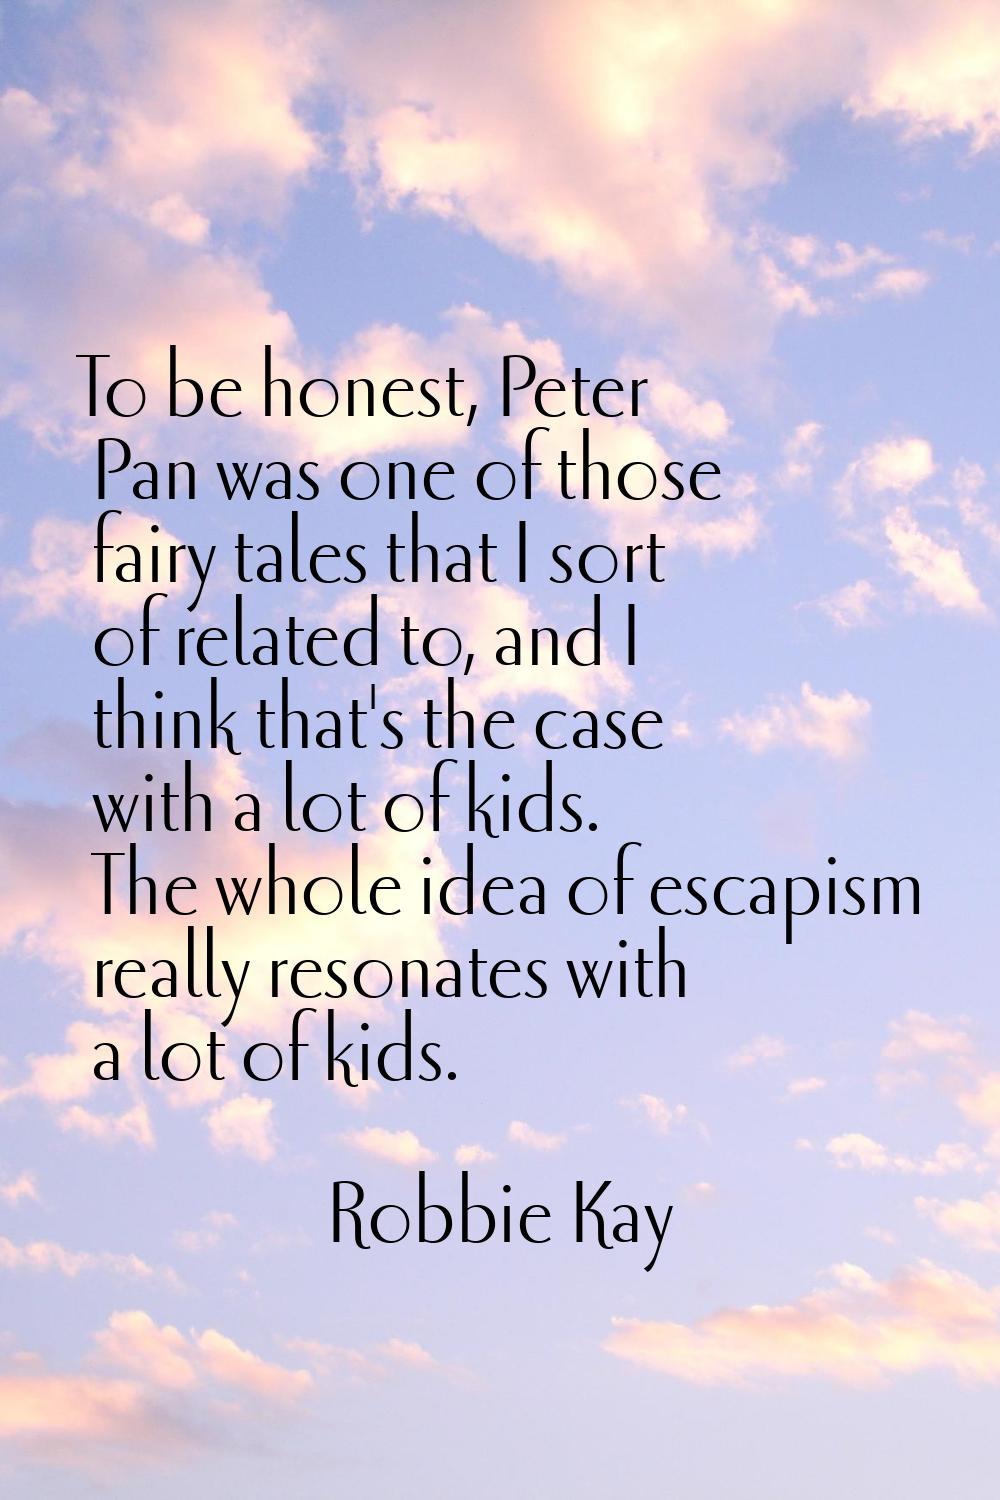 To be honest, Peter Pan was one of those fairy tales that I sort of related to, and I think that's 